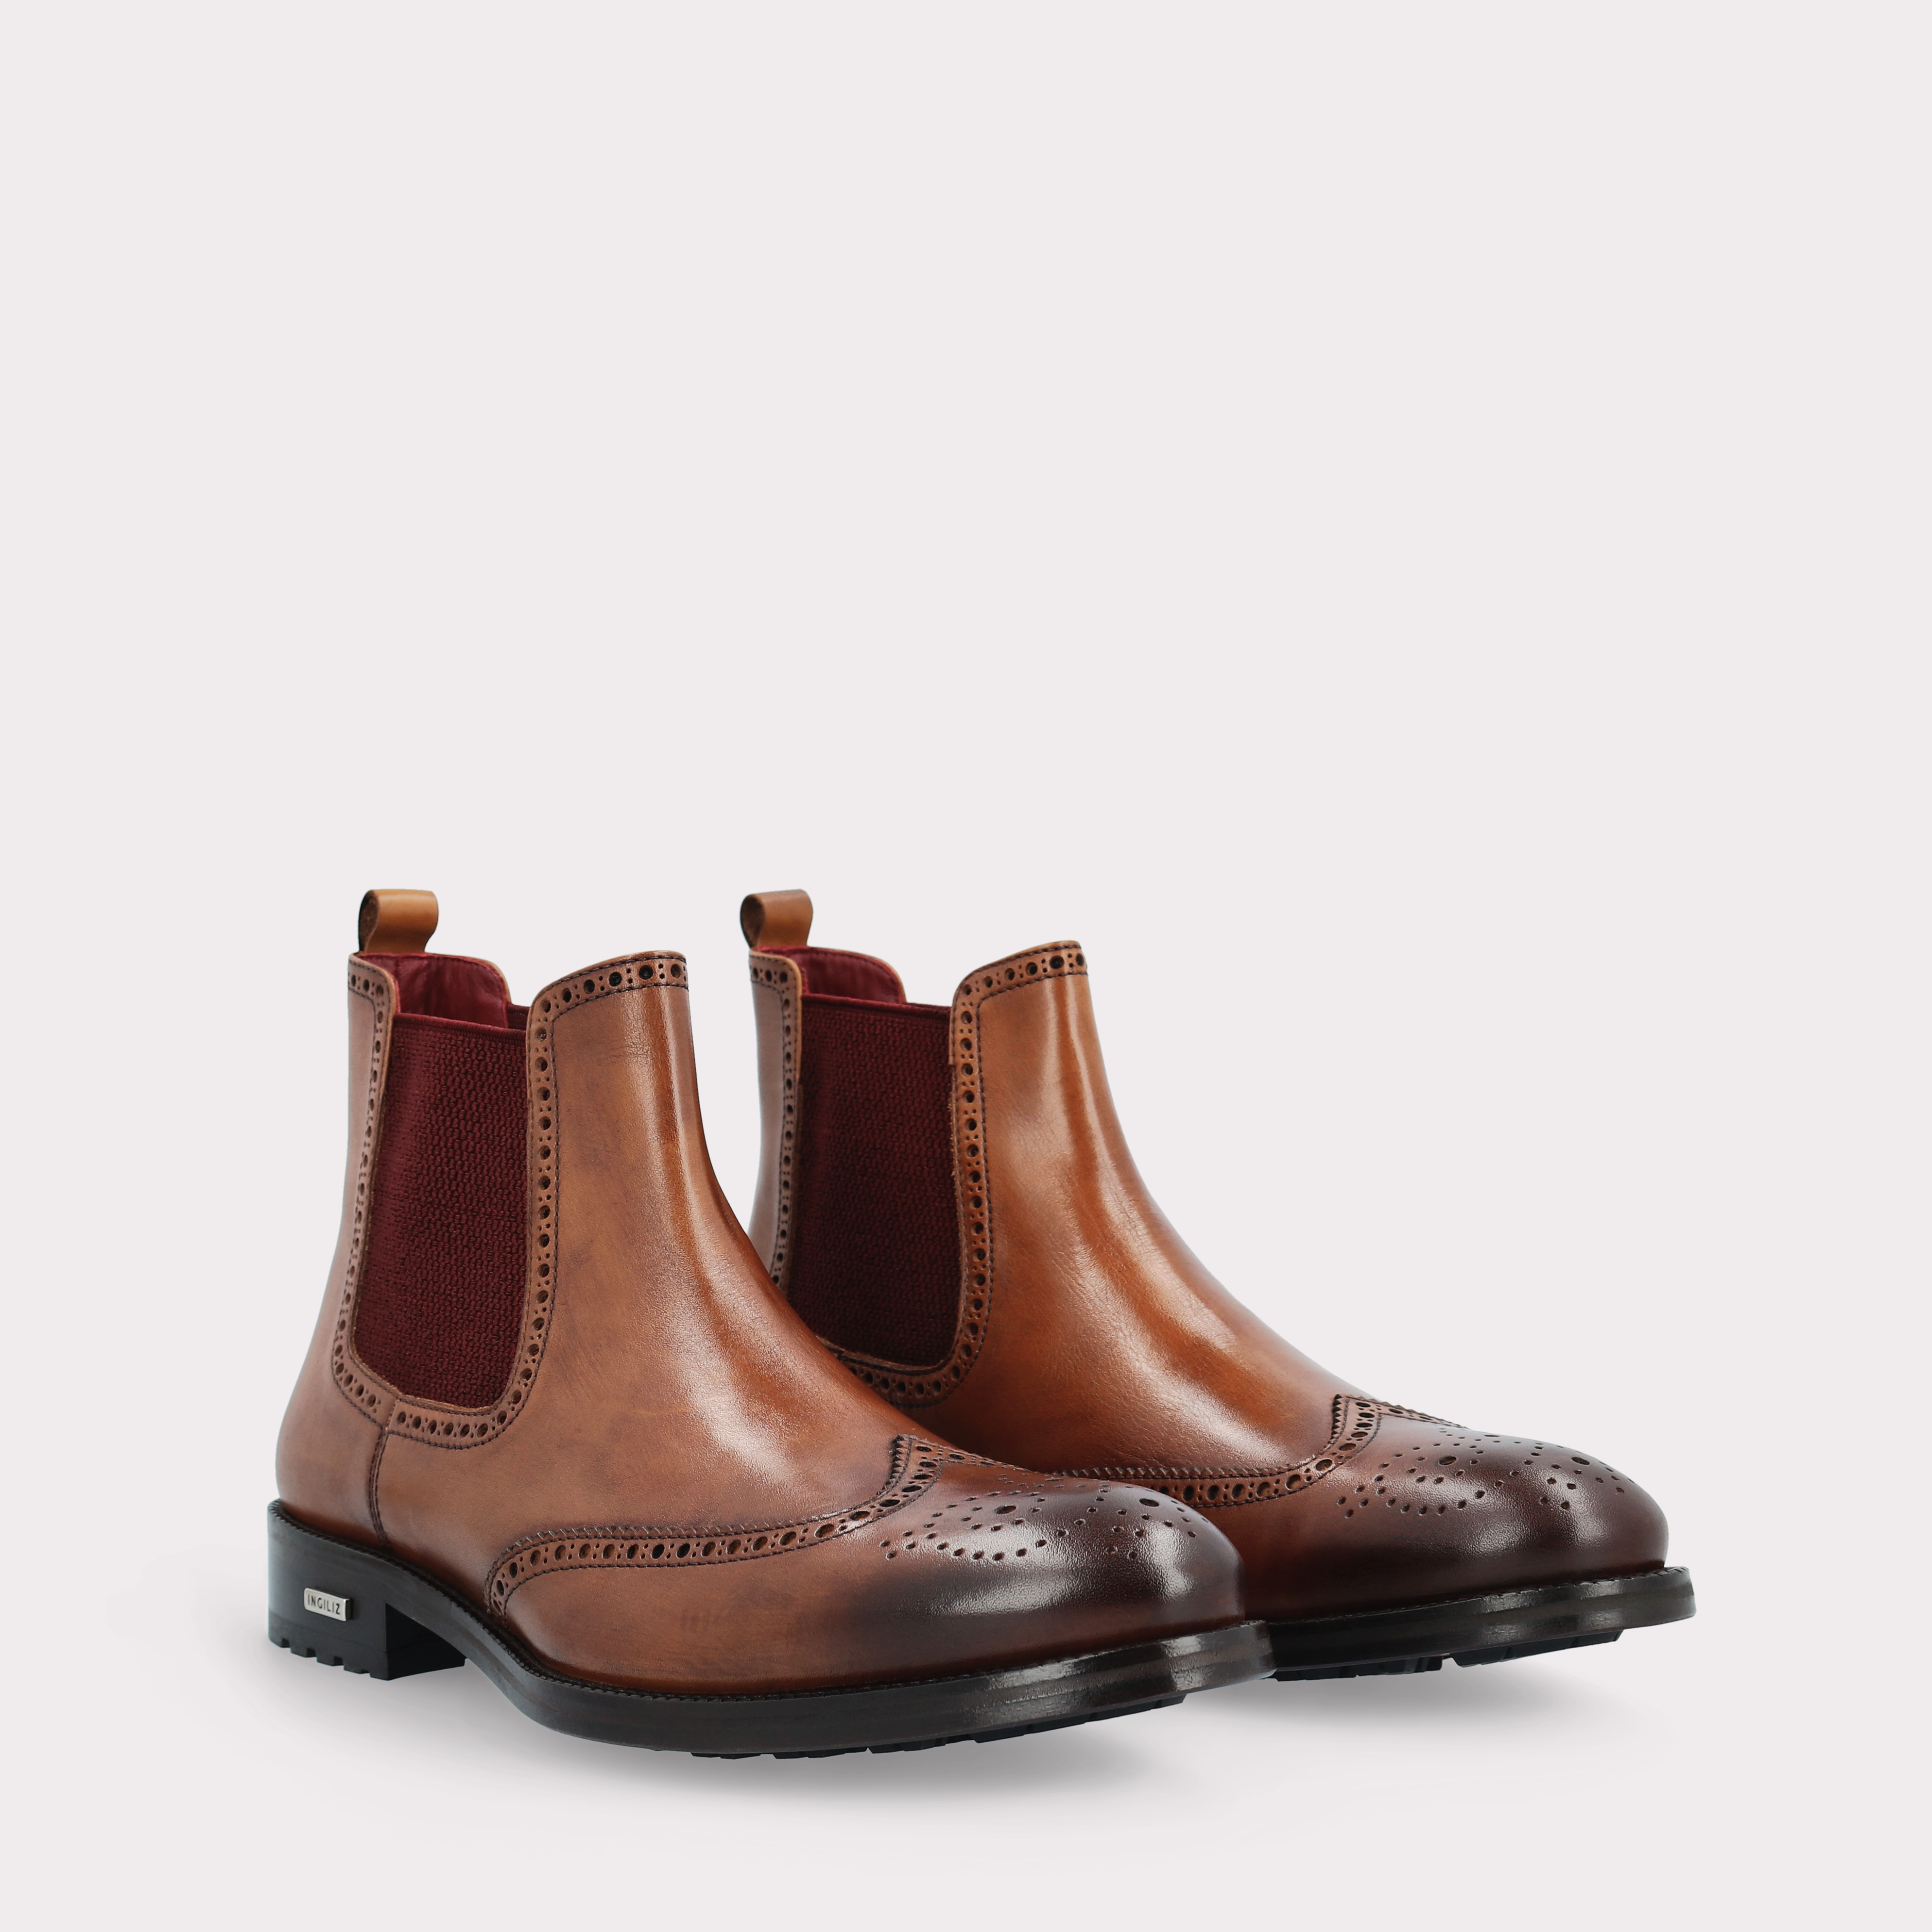 MODENA 01 brown leather chelsea boots with bordeaux elastic